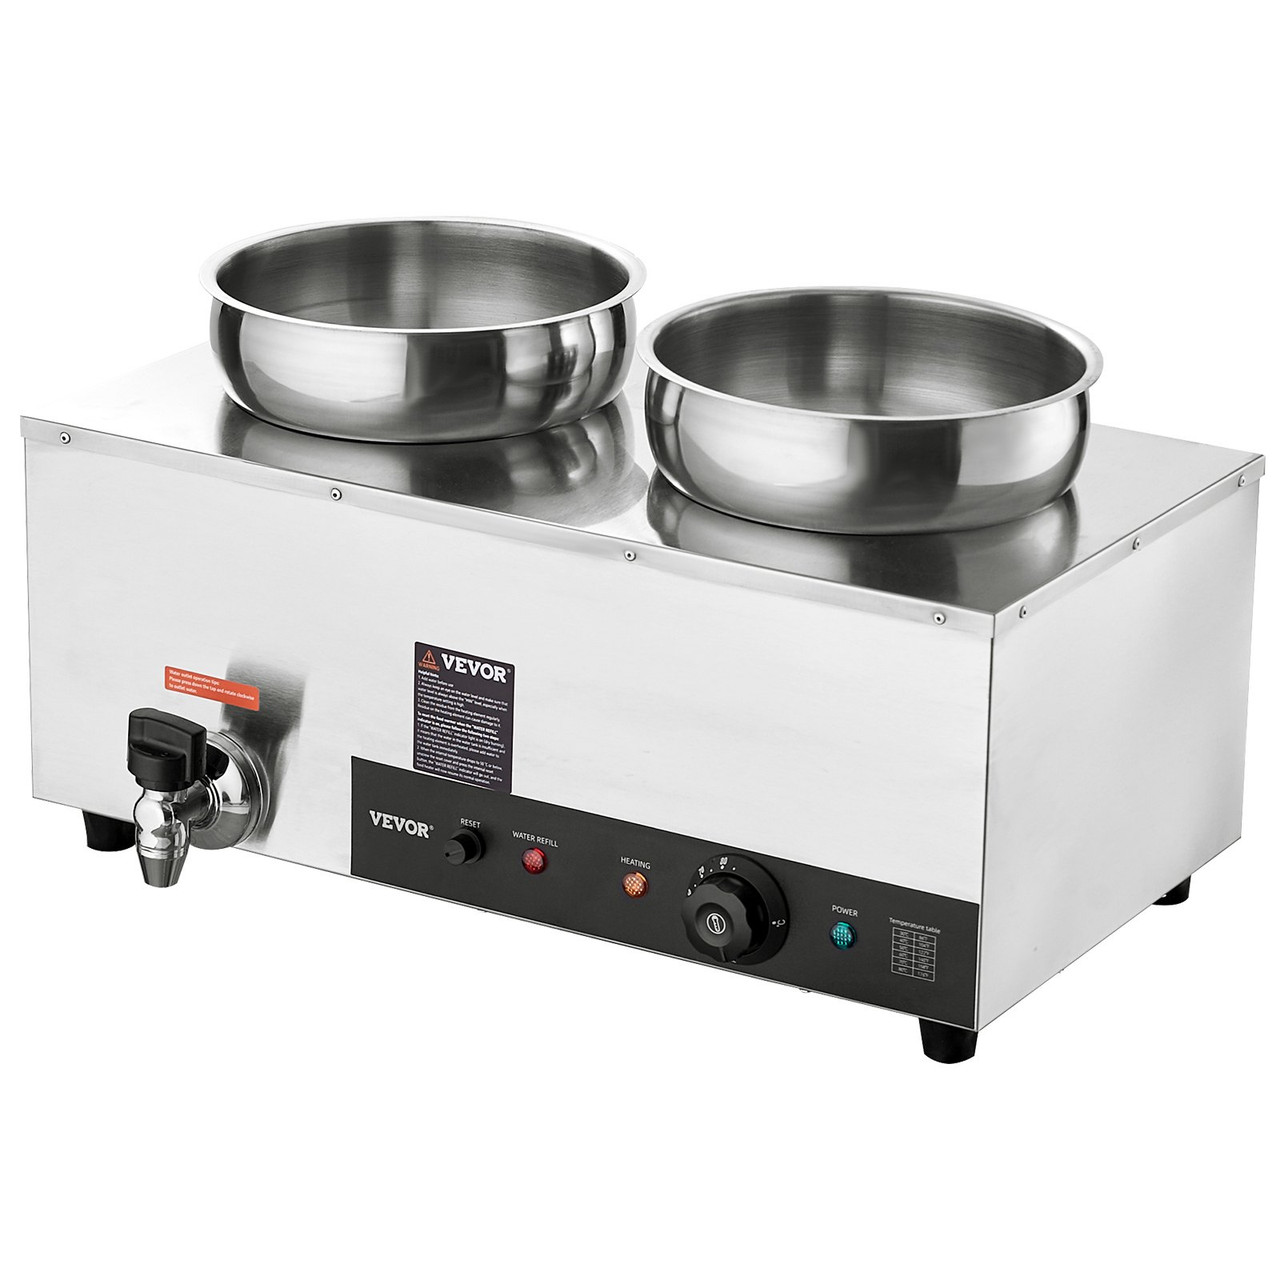 Electric Soup Warmer, Dual 7.4QT Stainless Steel Round Pot 86~185°F Adjustable Temp, 1200W Commercial Bain Marie with Anti-dry Burn and Reset Button, Soup Station for Restaurant, Buffet, Silver